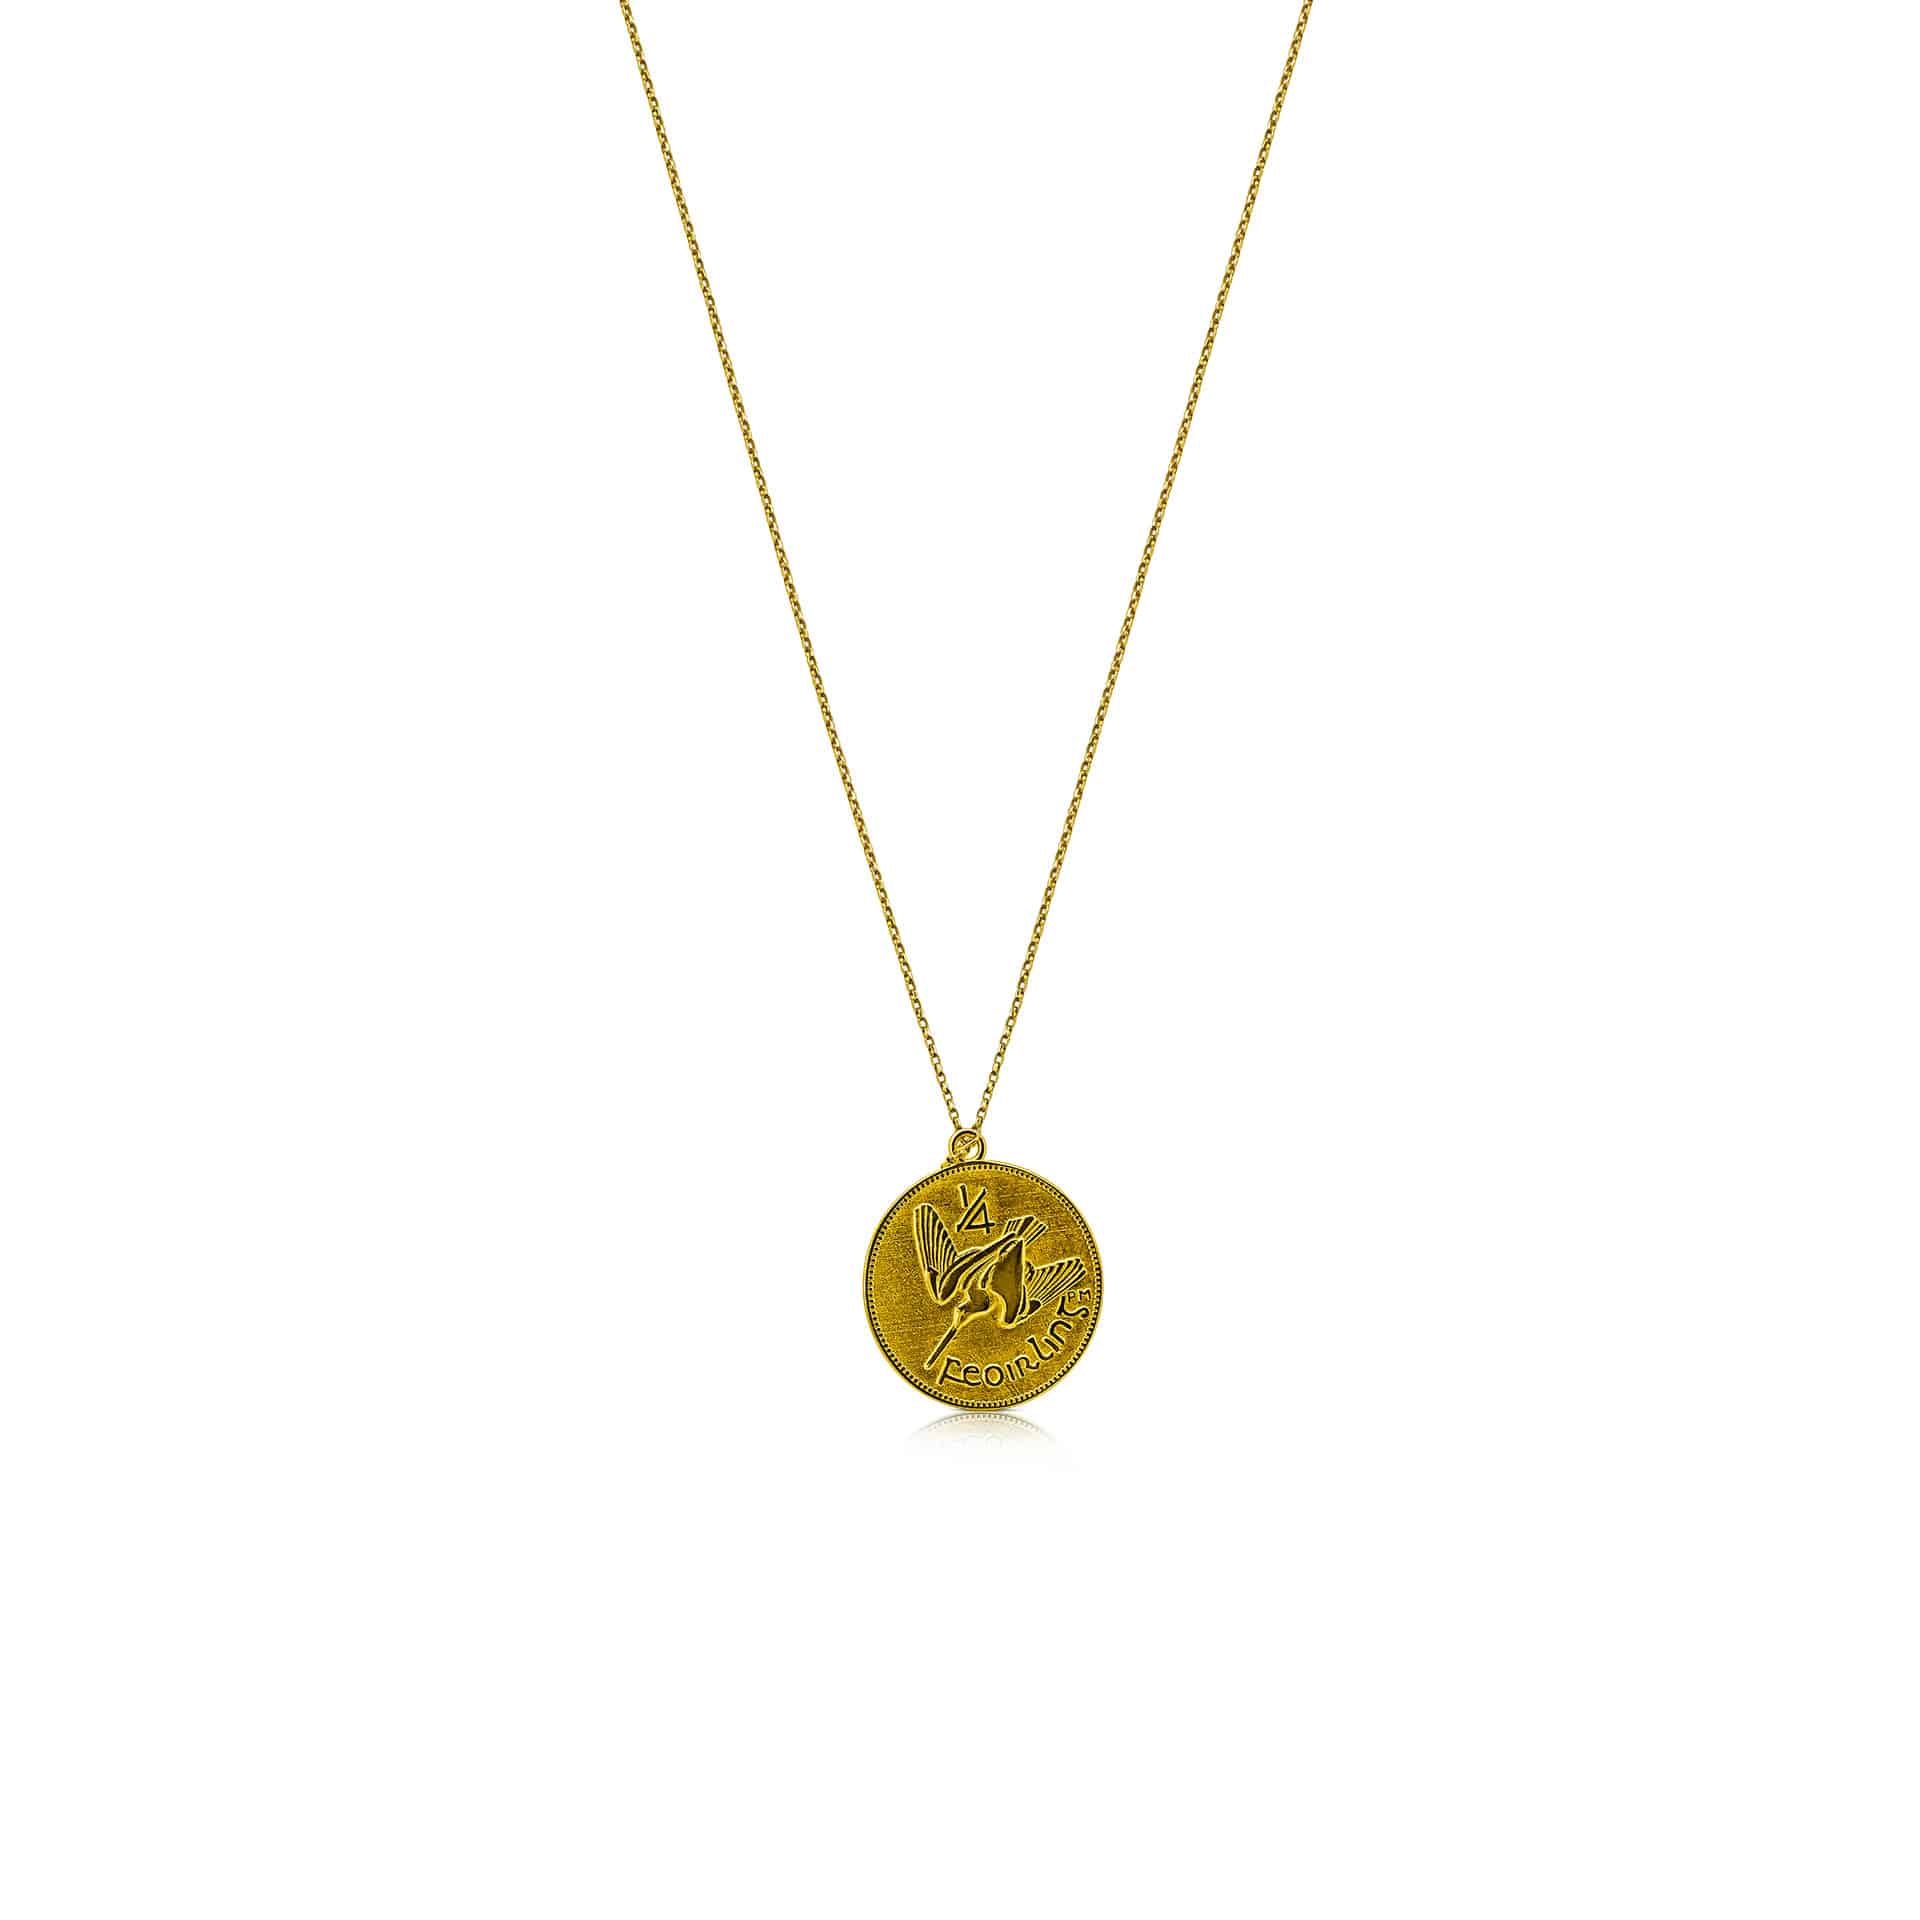 Irish Farthing Coin Necklace